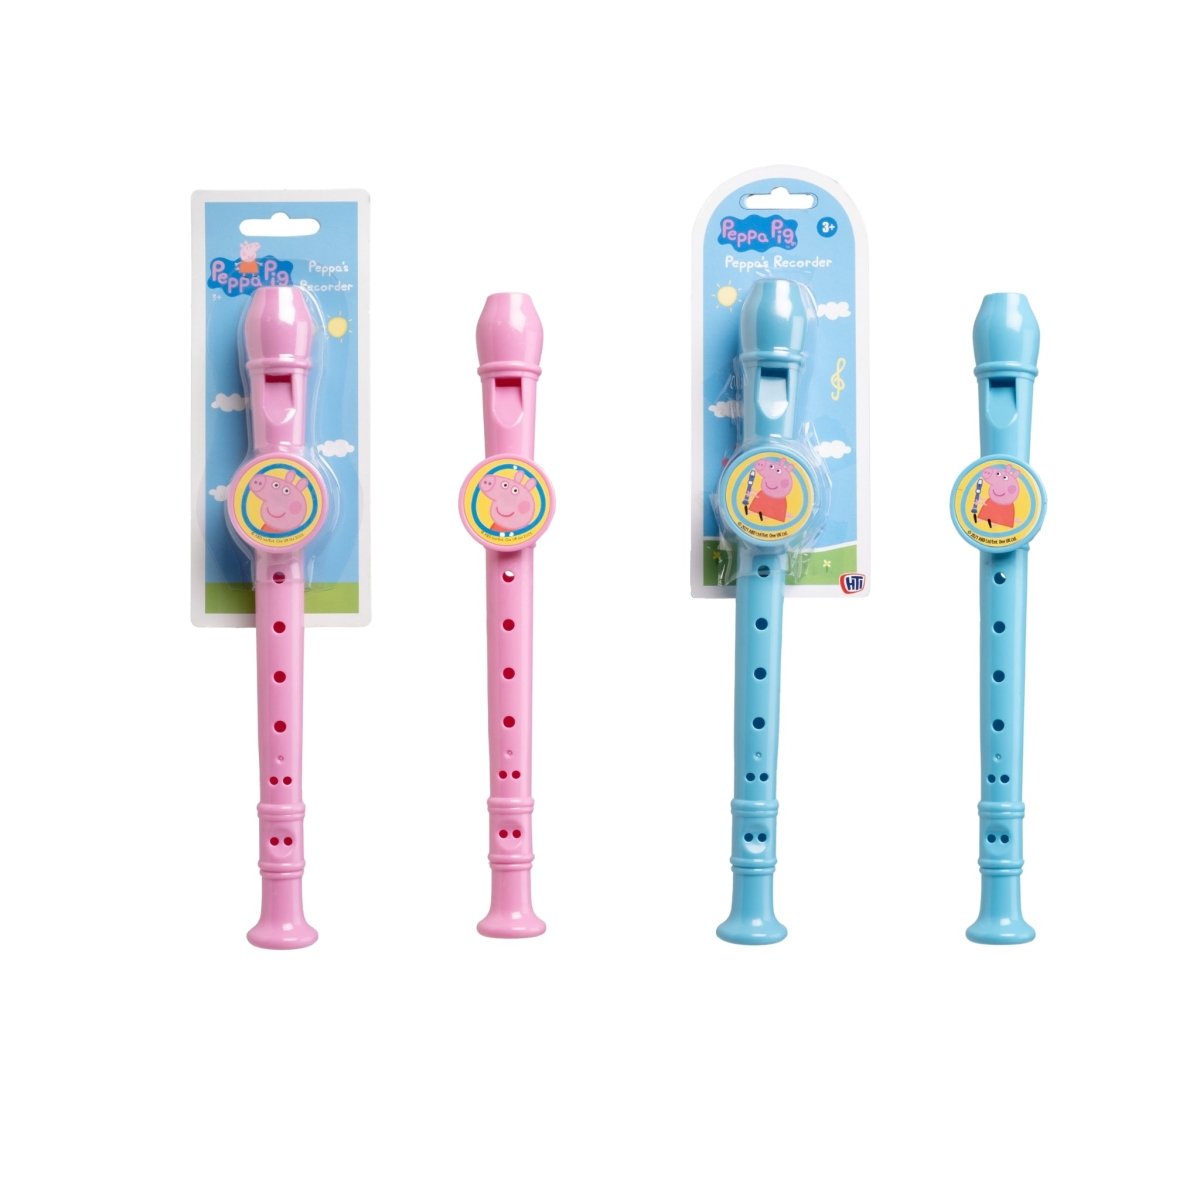 Peppa Pig Recorder - Kids Party Craft